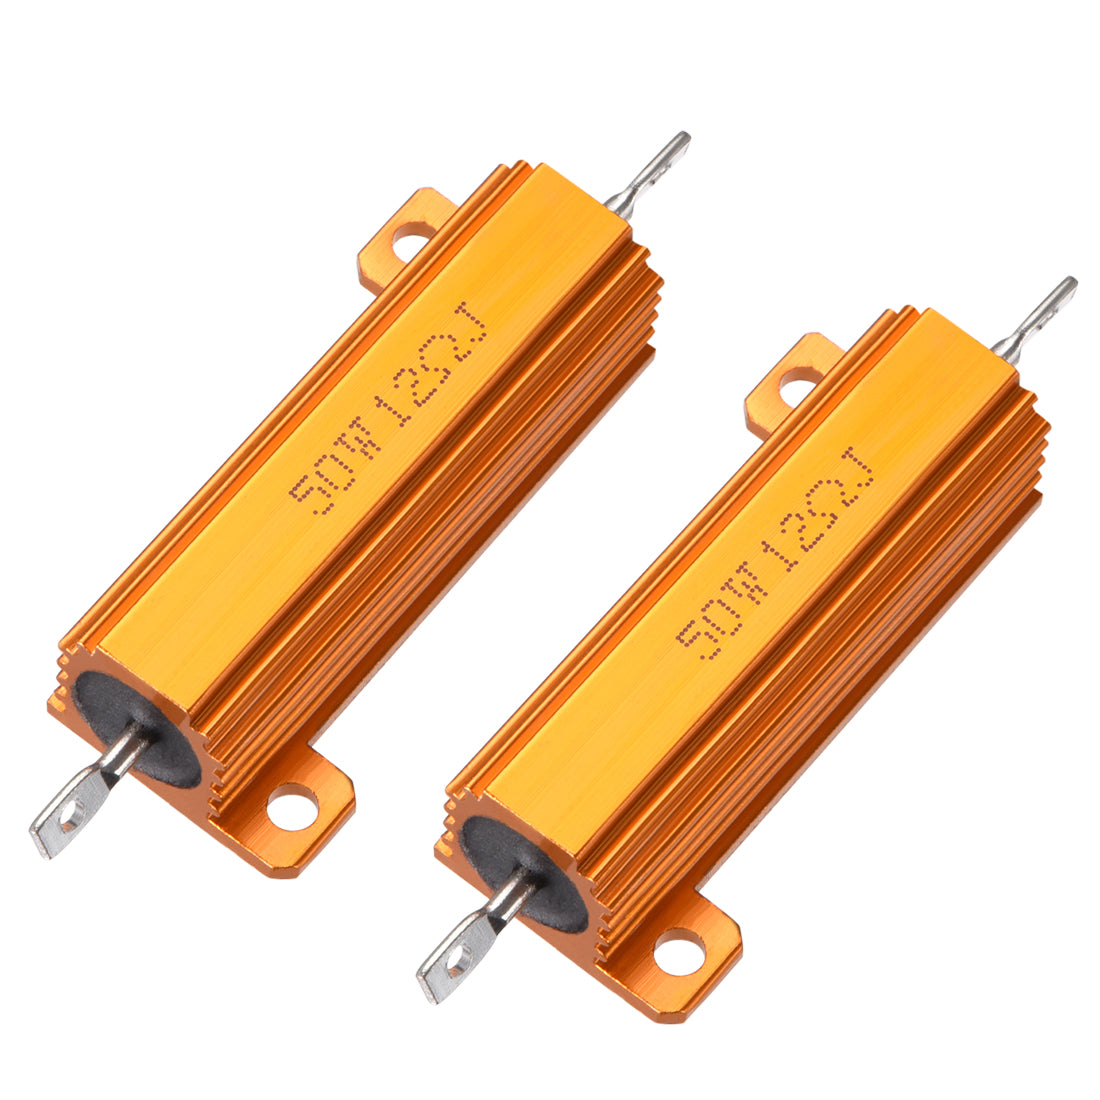 uxcell Uxcell 50W 12 Ohm 5% Aluminum Housing Resistor Screw  Chassis Mounted Aluminum Case Wirewound Resistor Load Resistors Gold Tone 2pcs